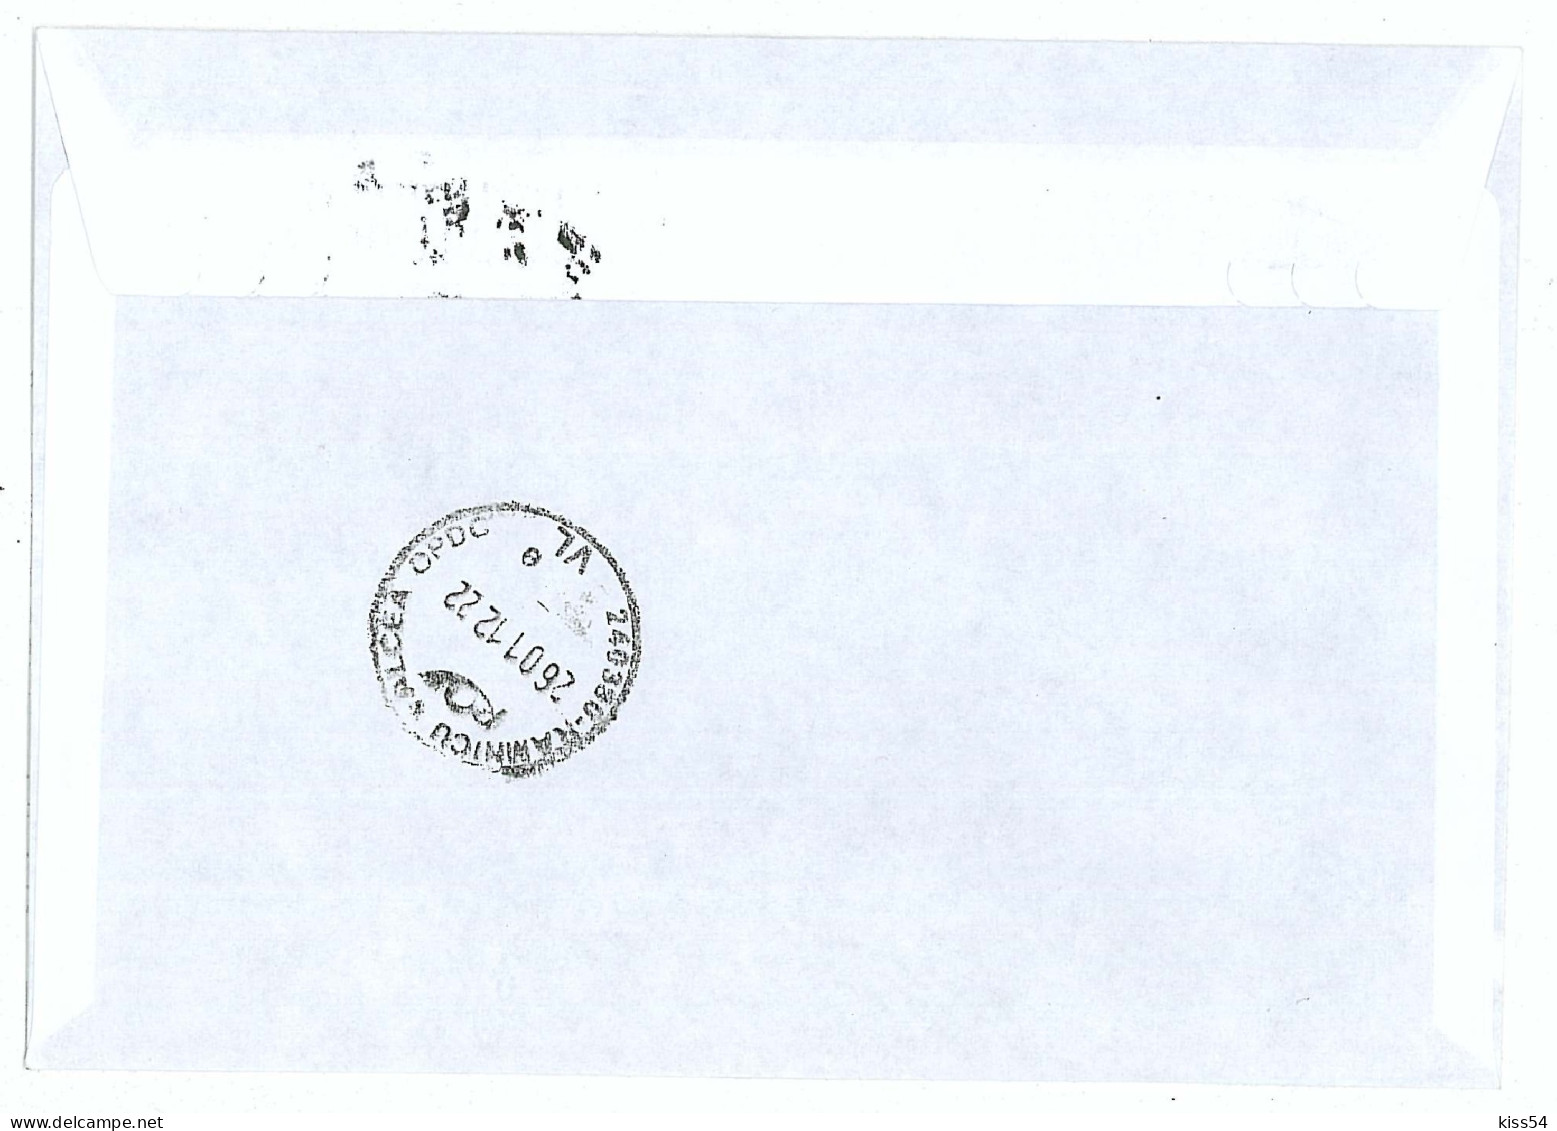 NCP 25 - 4212-a Flowers & COW,Romania - Registered, Stamp With Vignette - 2012 - Brieven En Documenten